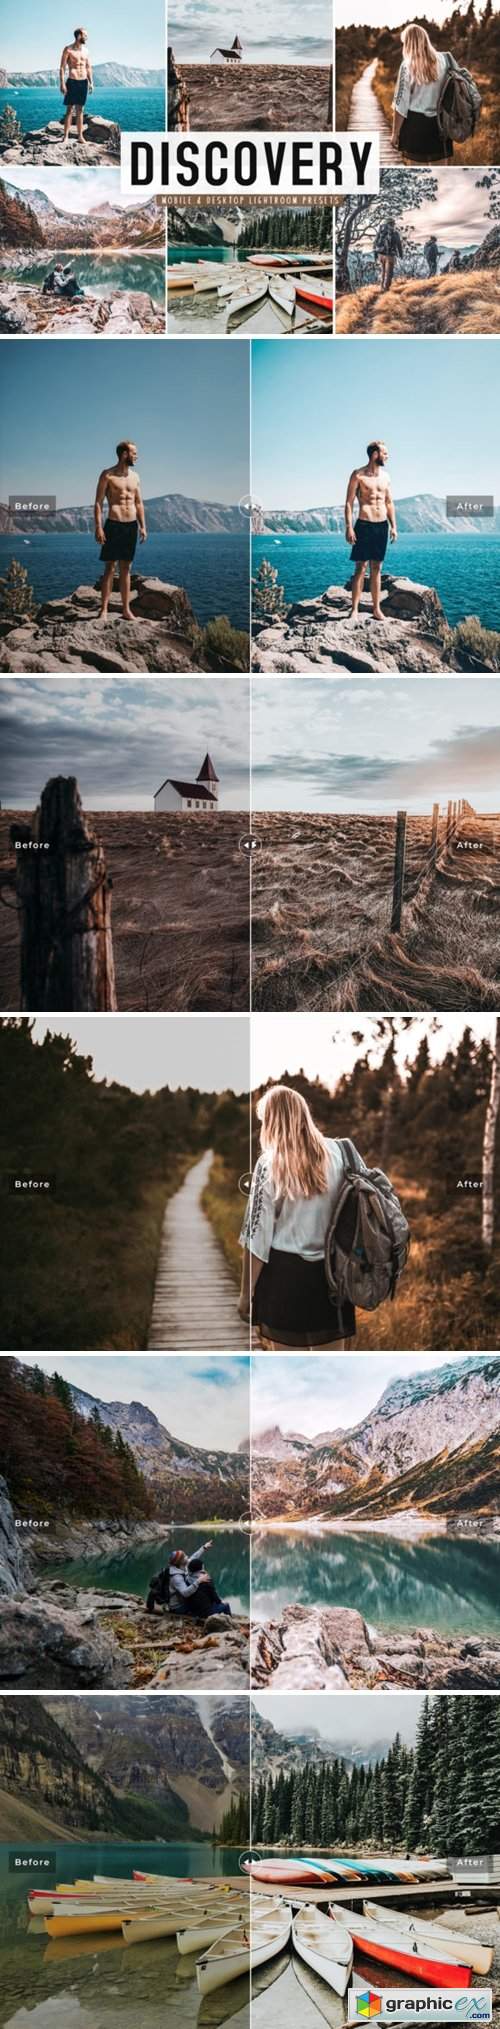 Discovery Lightroom Presets Pack 